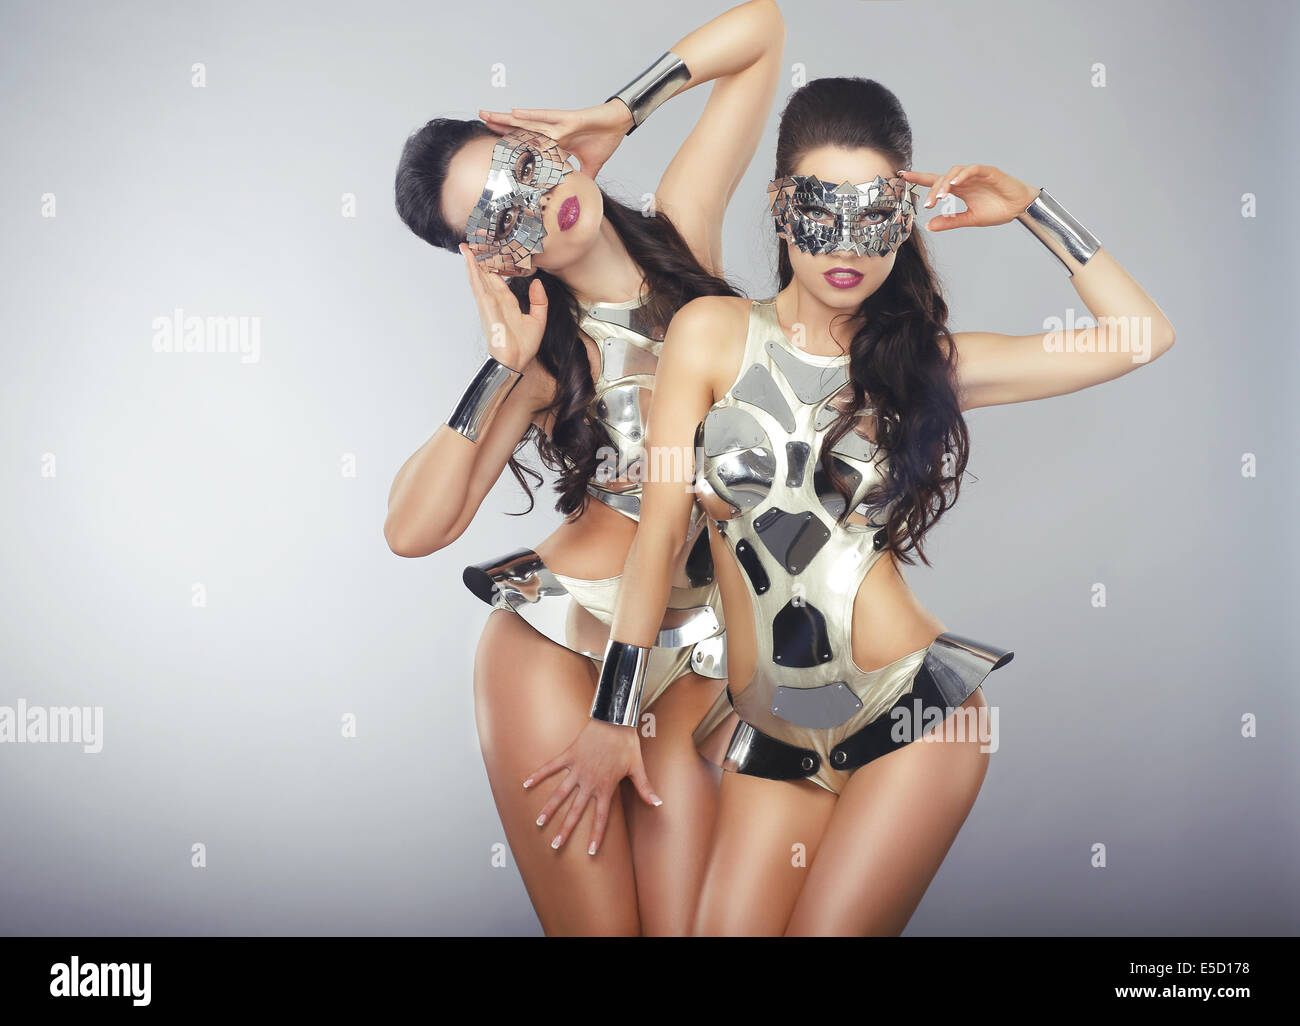 Vogue. People in Sparkling Cosmic Cyber Costumes Gesturing Stock Photo